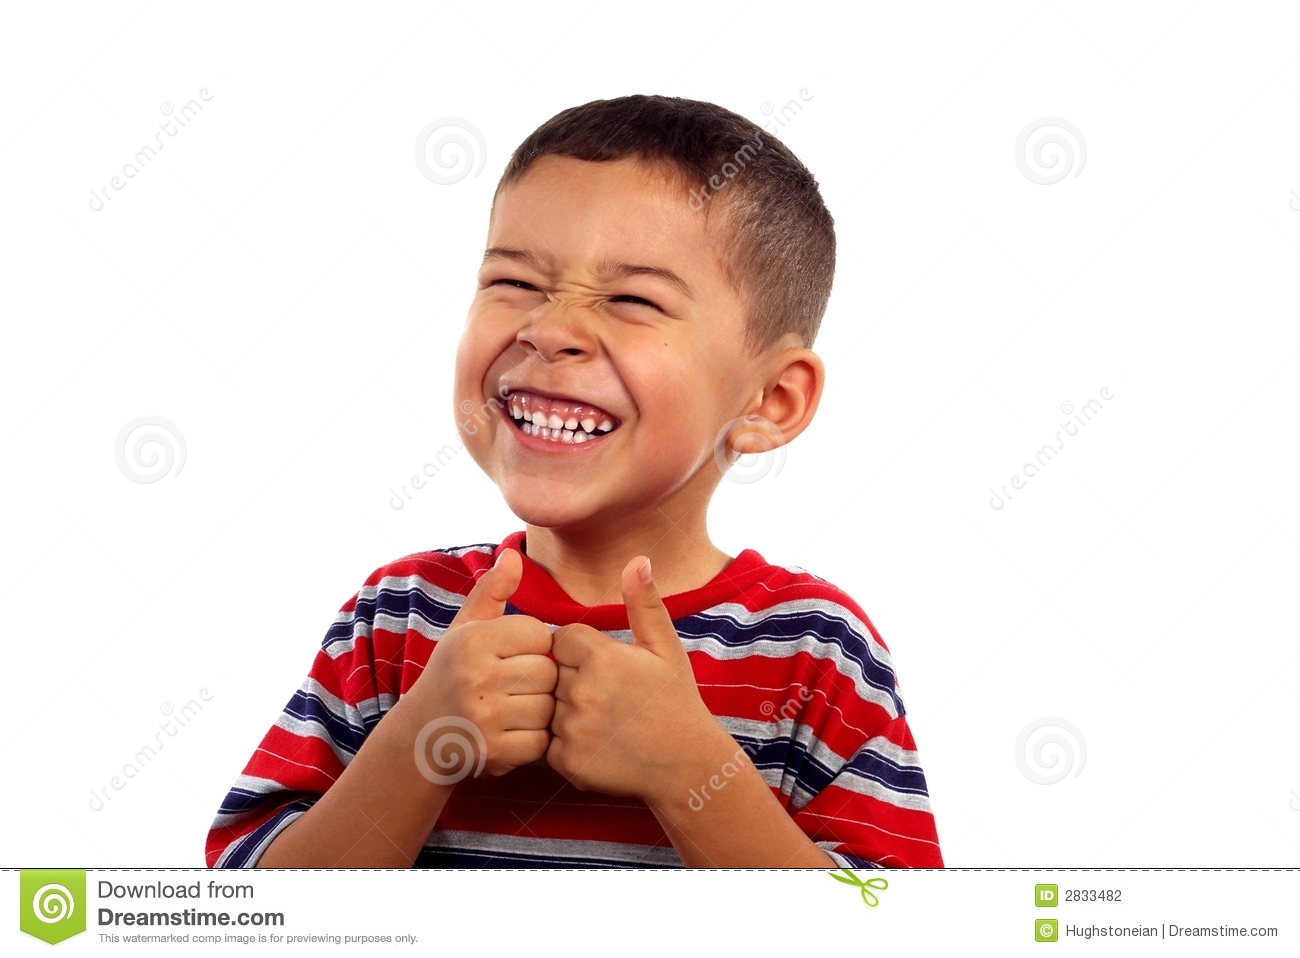 Thumbs Up Kid Clipart Boy Smiling With Thumbs Up